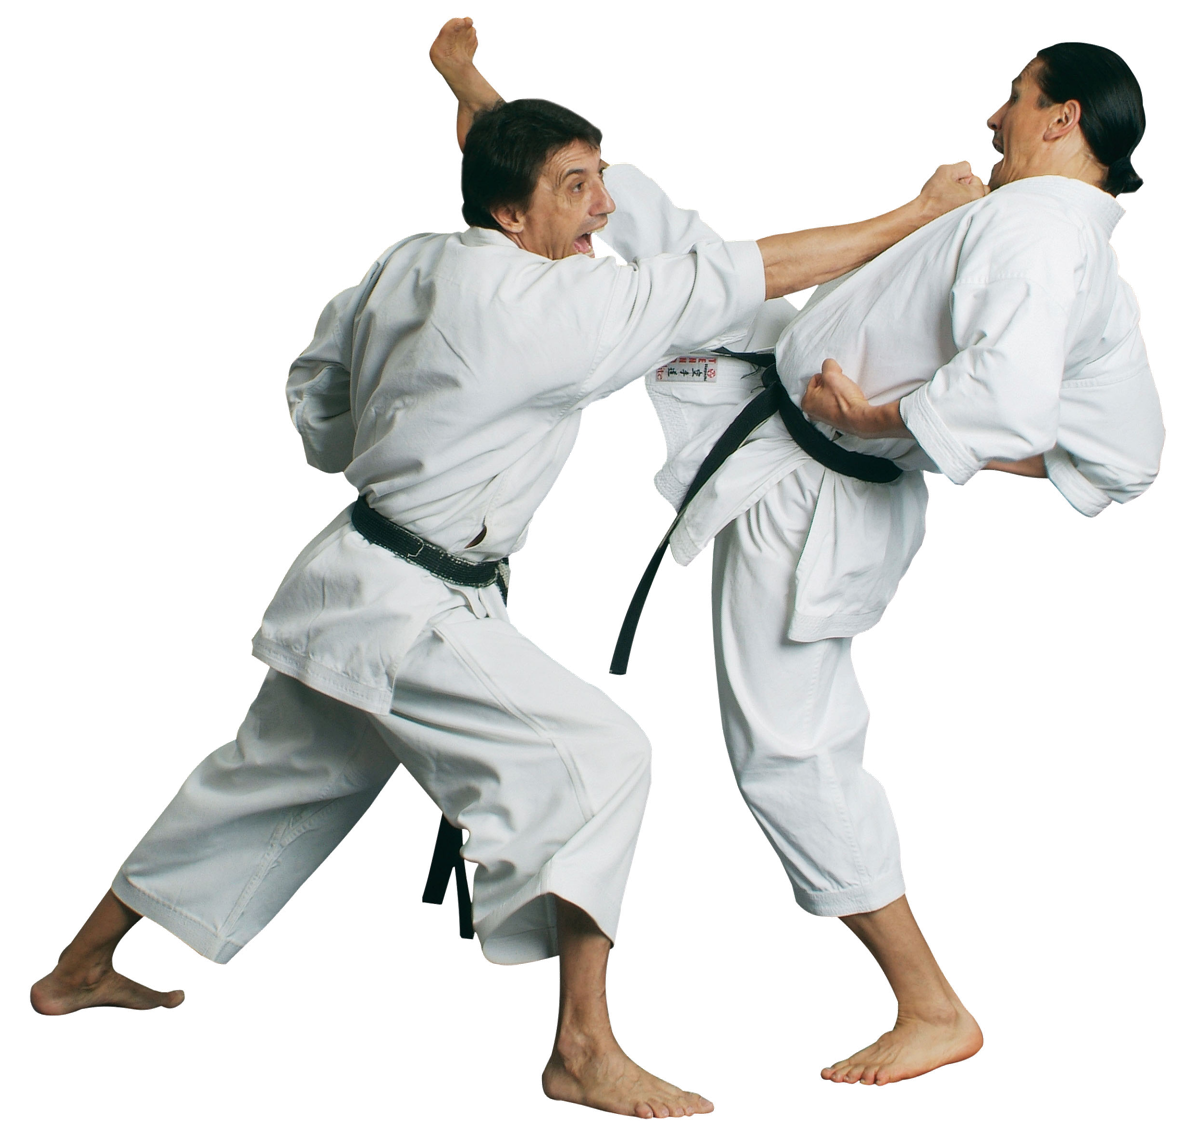 Karate Martial Male Fighter Free Photo PNG Image